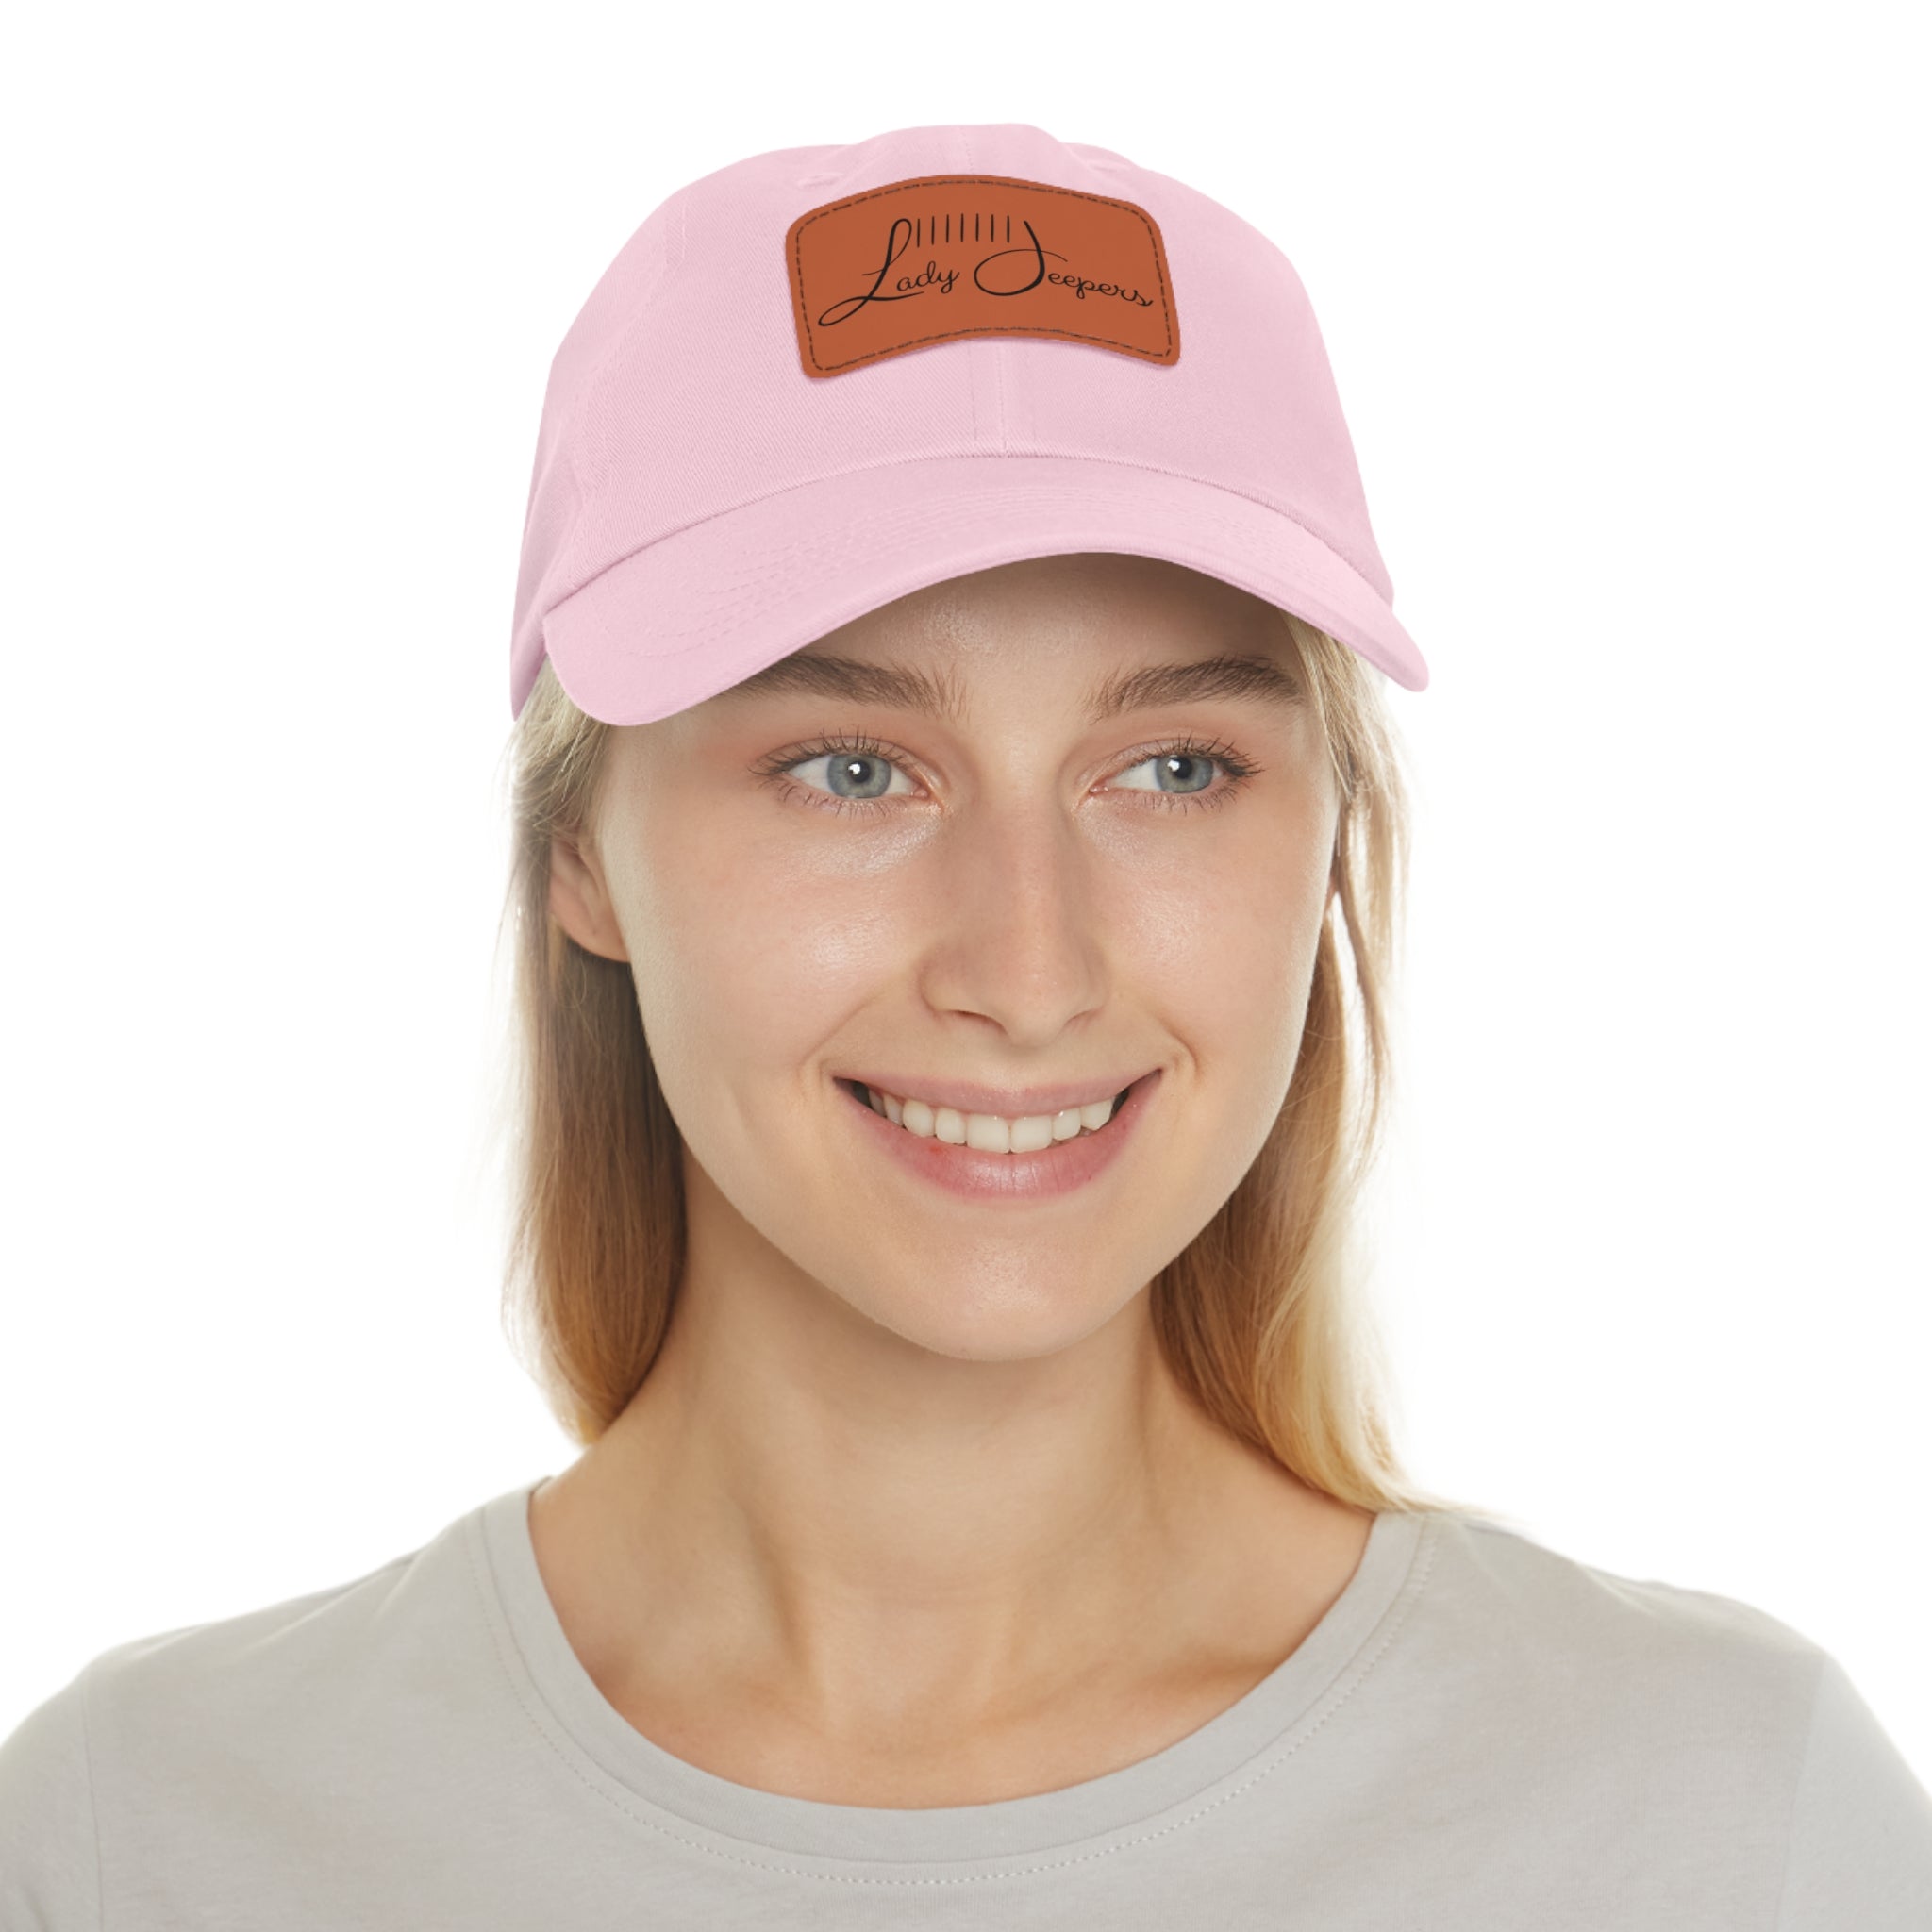 Dad Hat with Rectangle Leather Patch With LadyJeepers.com Logo